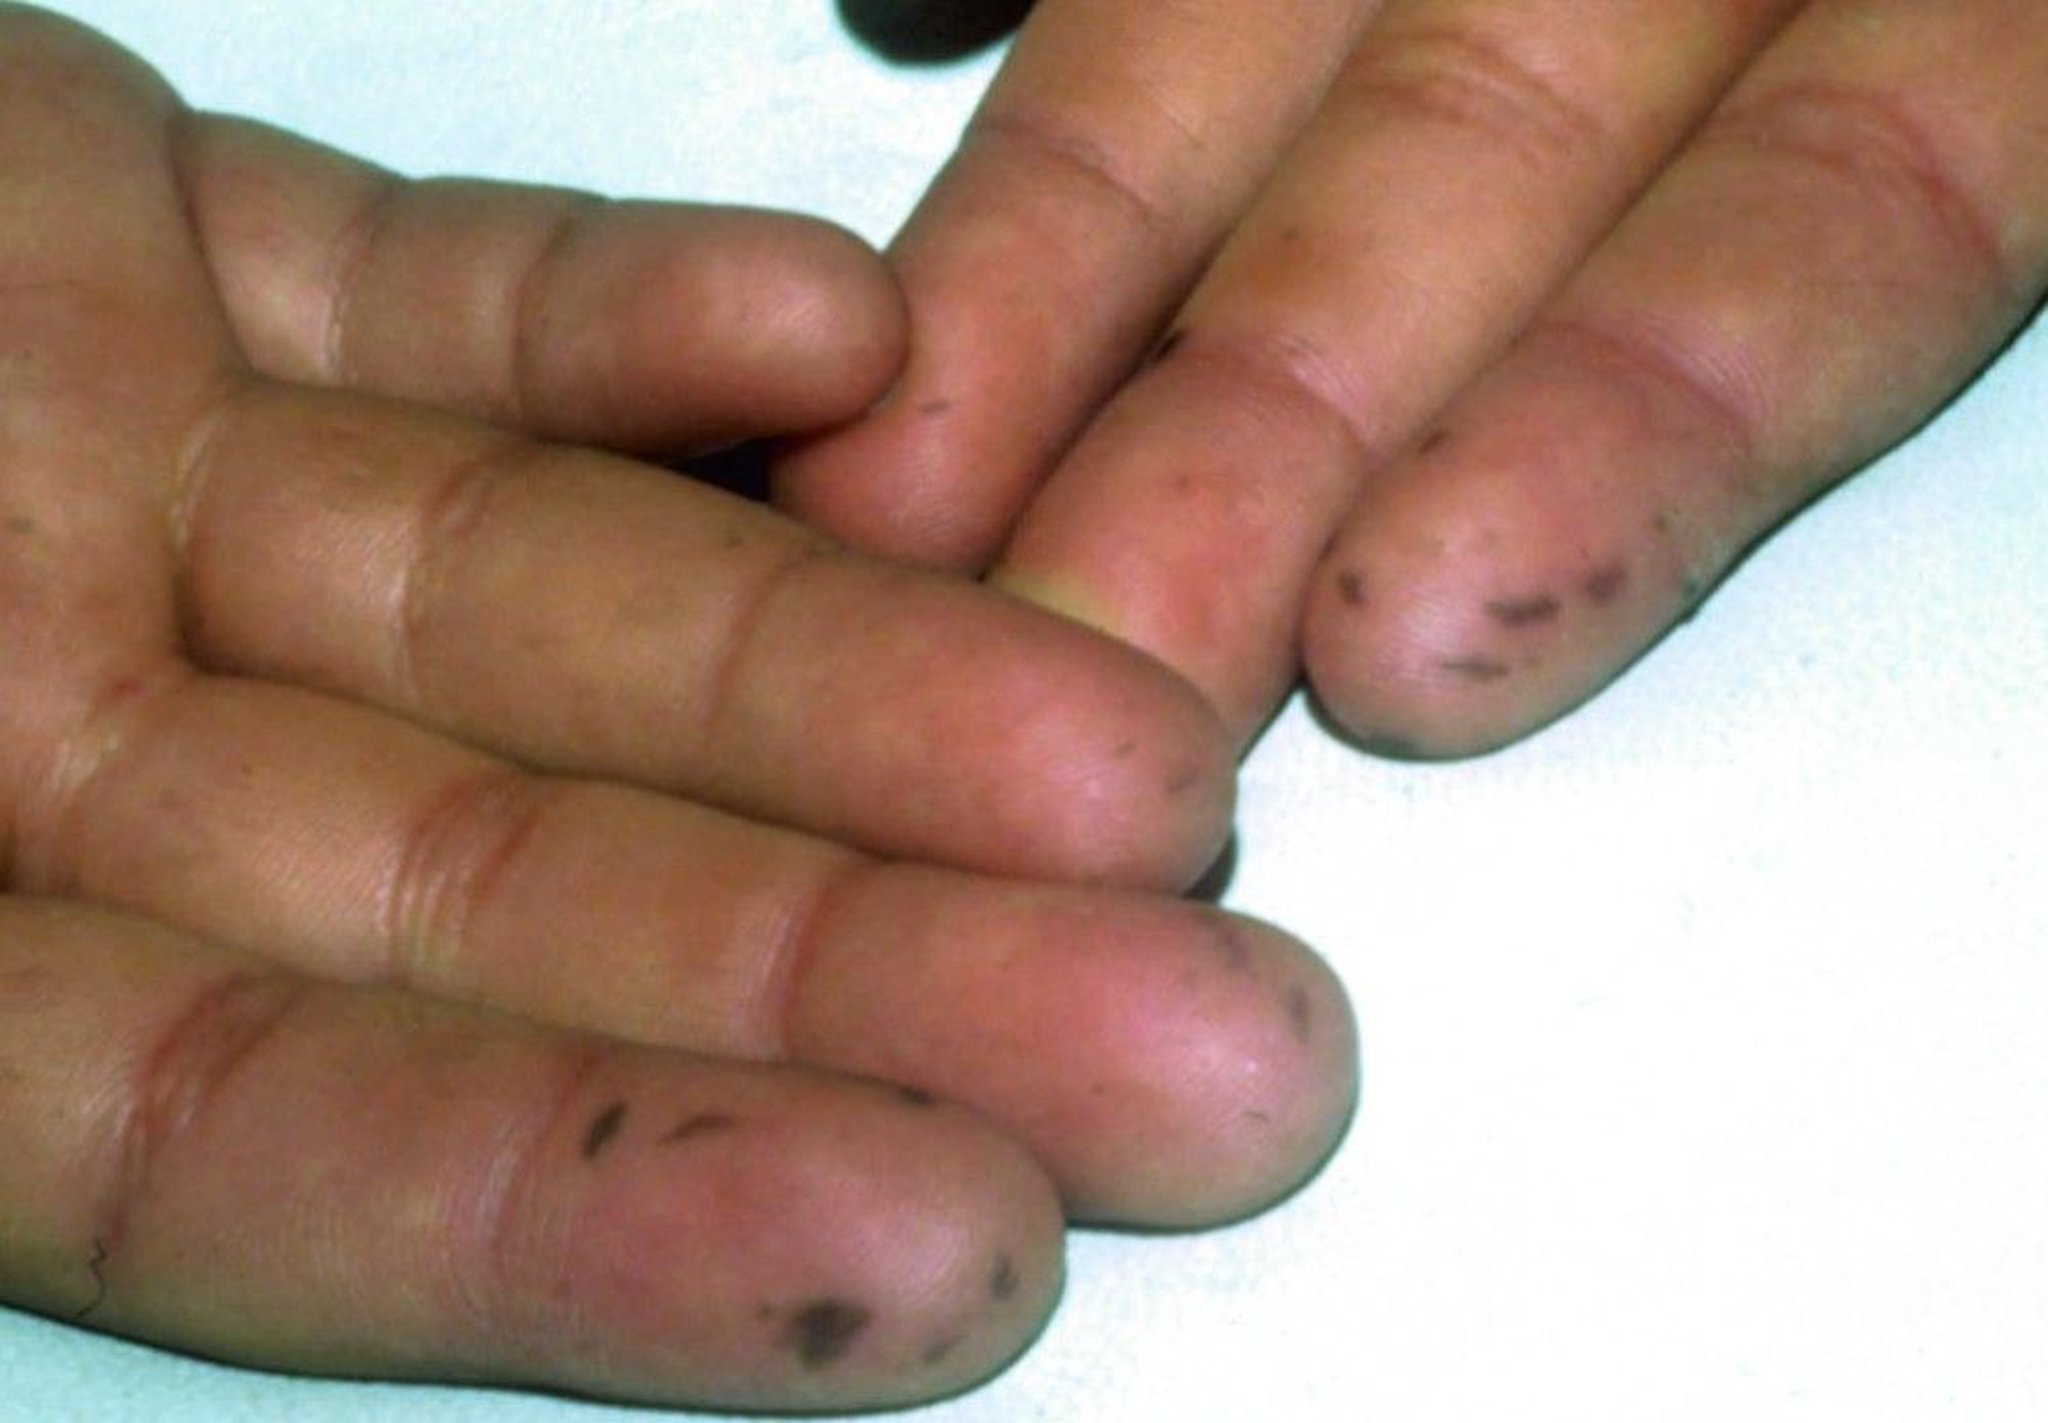 Bluish Black Spots on the Fingers (Peutz-Jeghers Syndrome)